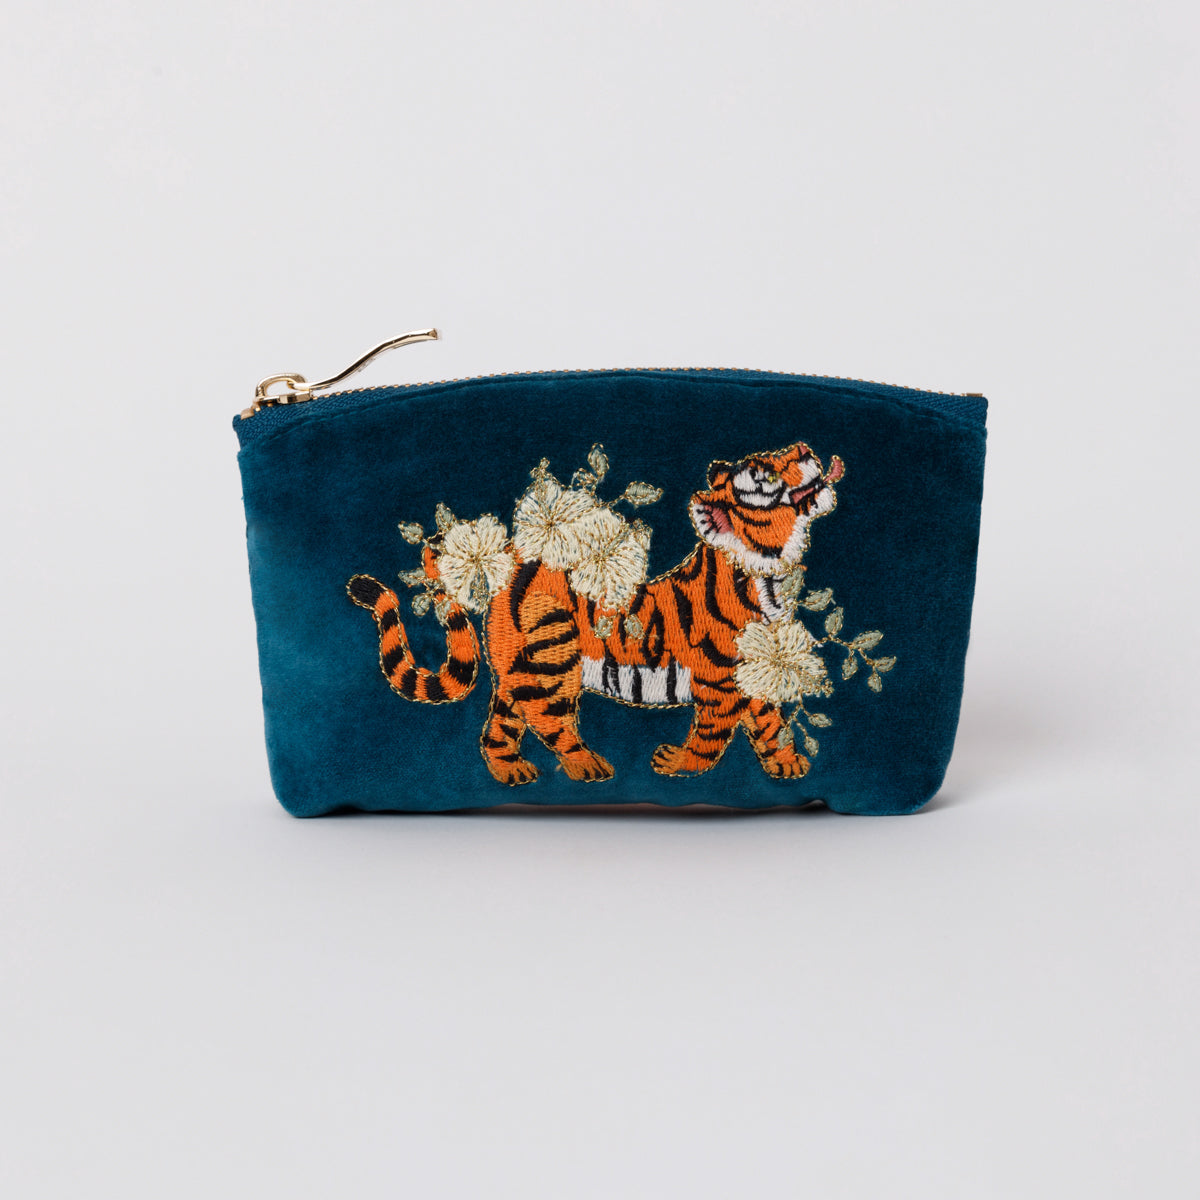 MARC JACOBS Outlet: The Snapshot Tiger Stripe bag - Natural | MARC JACOBS  crossbody bags H161M01RE21 online at GIGLIO.COM